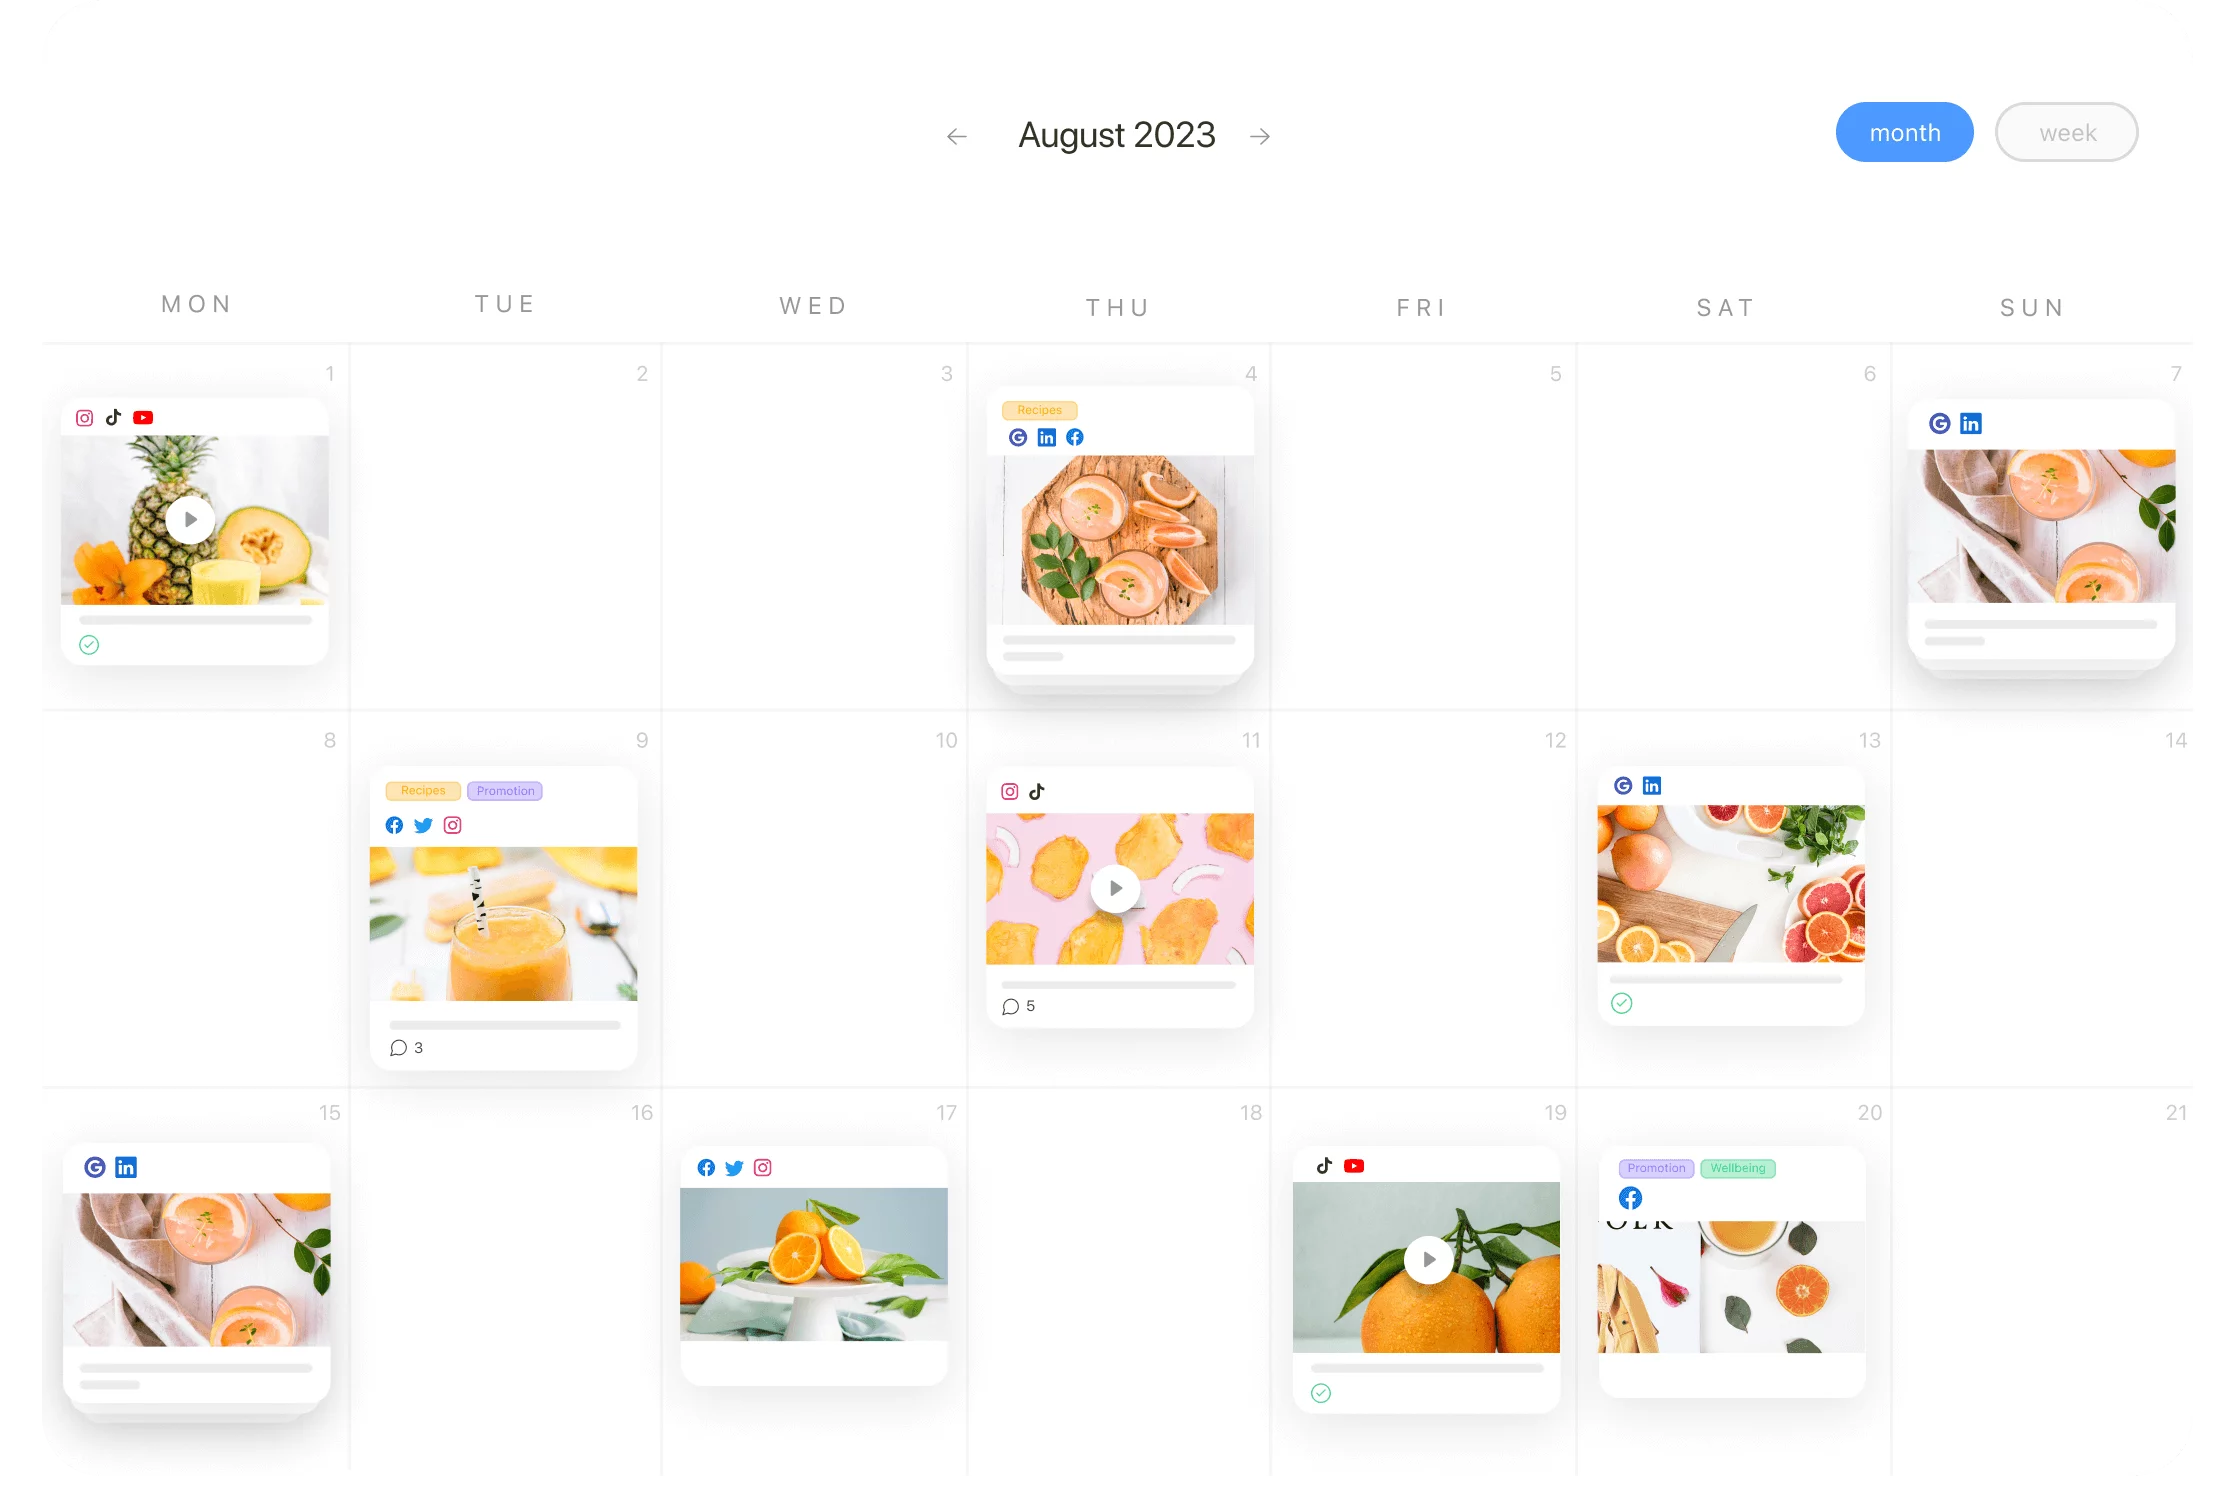 Social media calendar with different scheduled and published posts of August